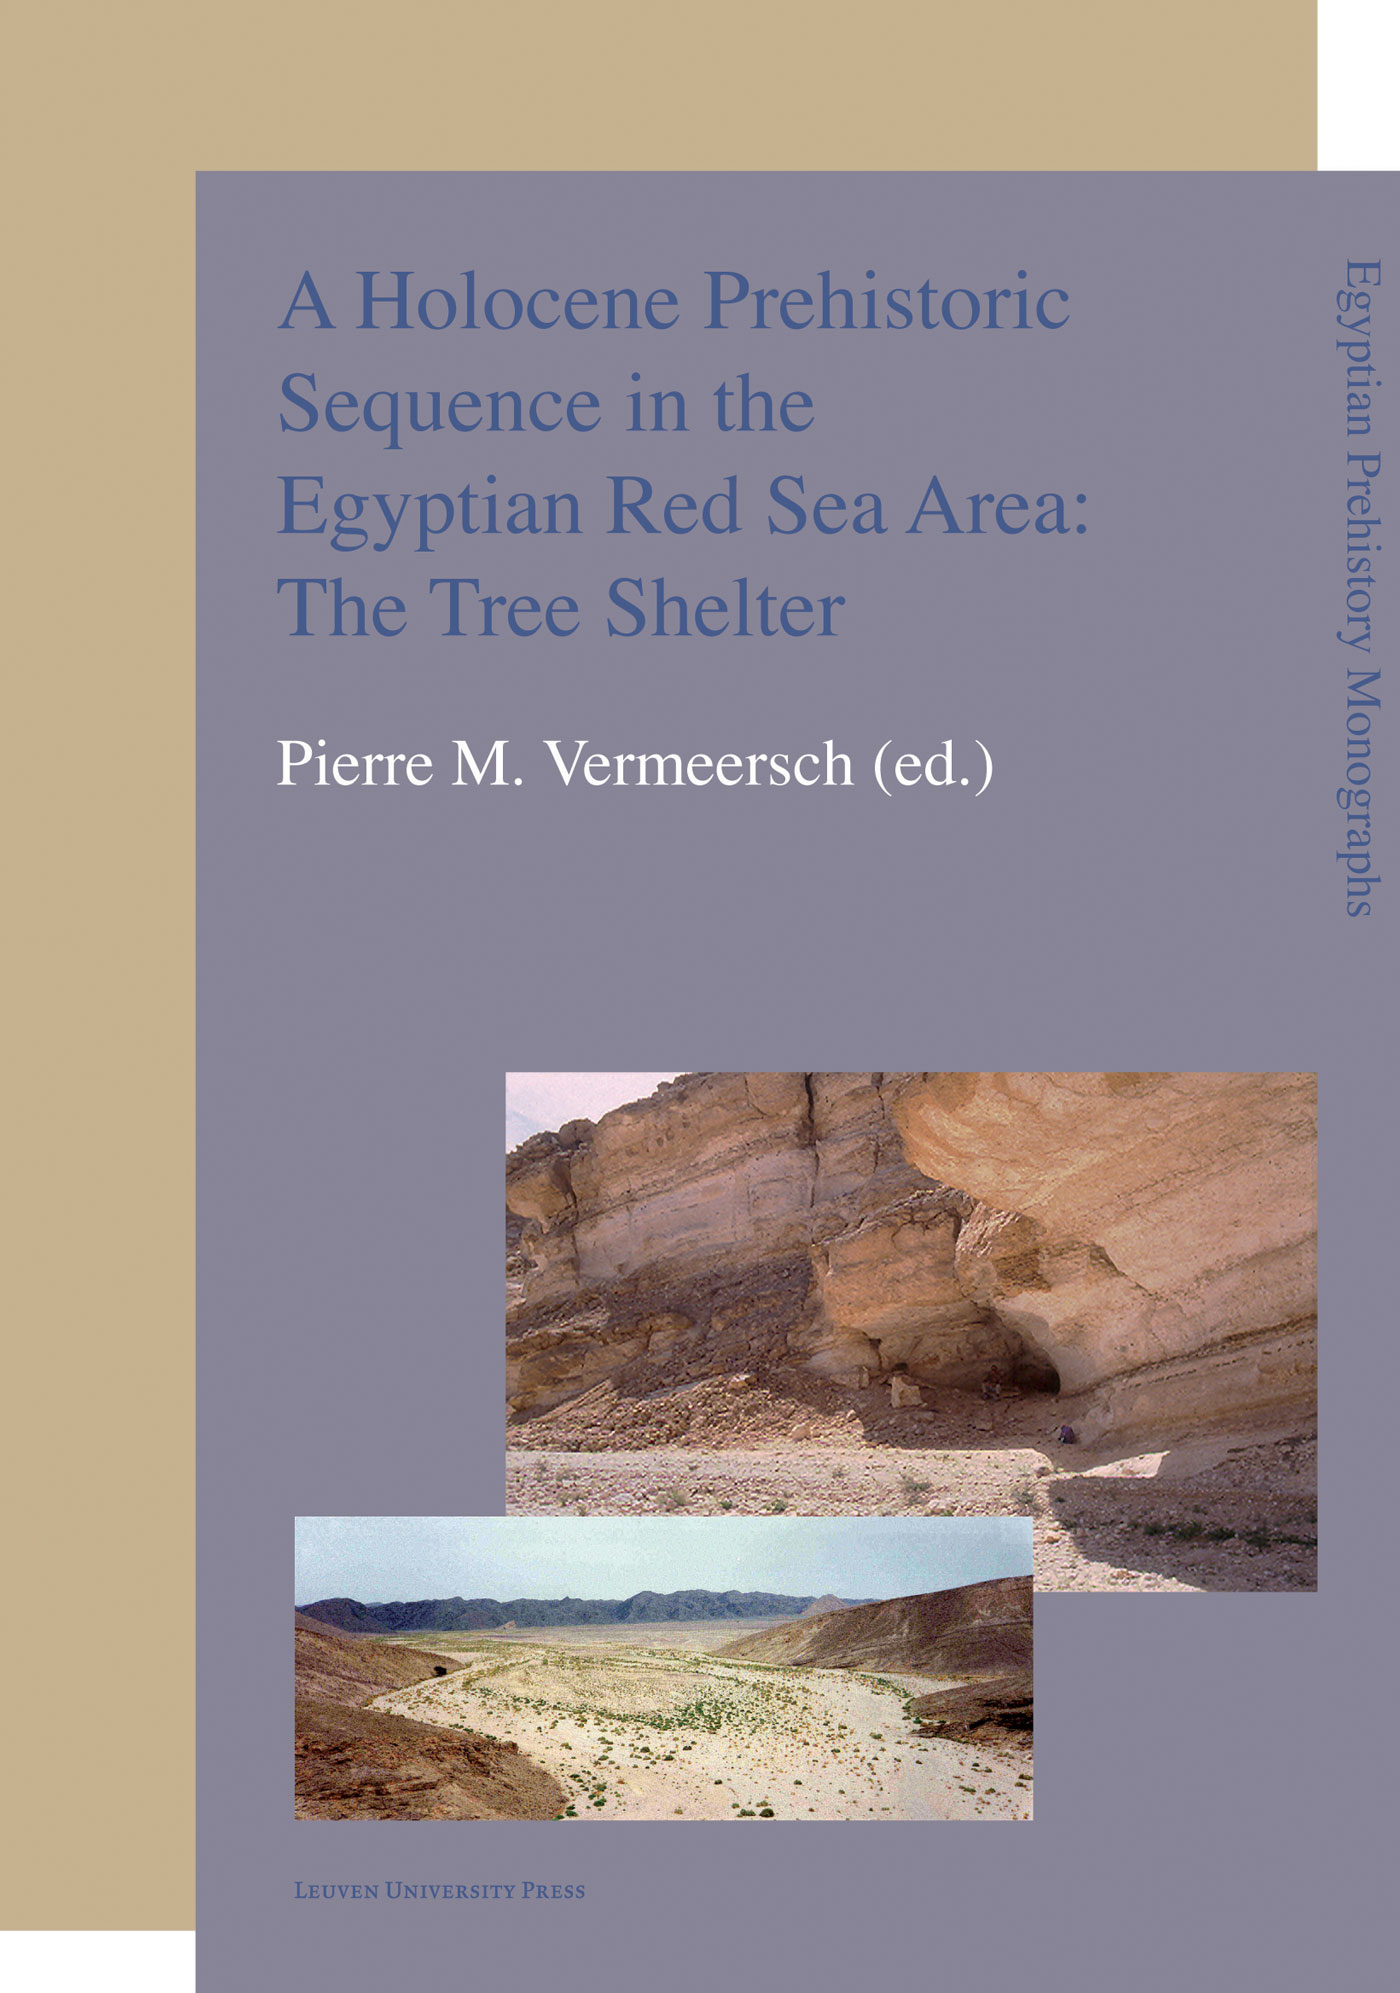 A Holocene prehistoric sequence in the Egyptian Red Sea area: The tree shelter (Ebook)